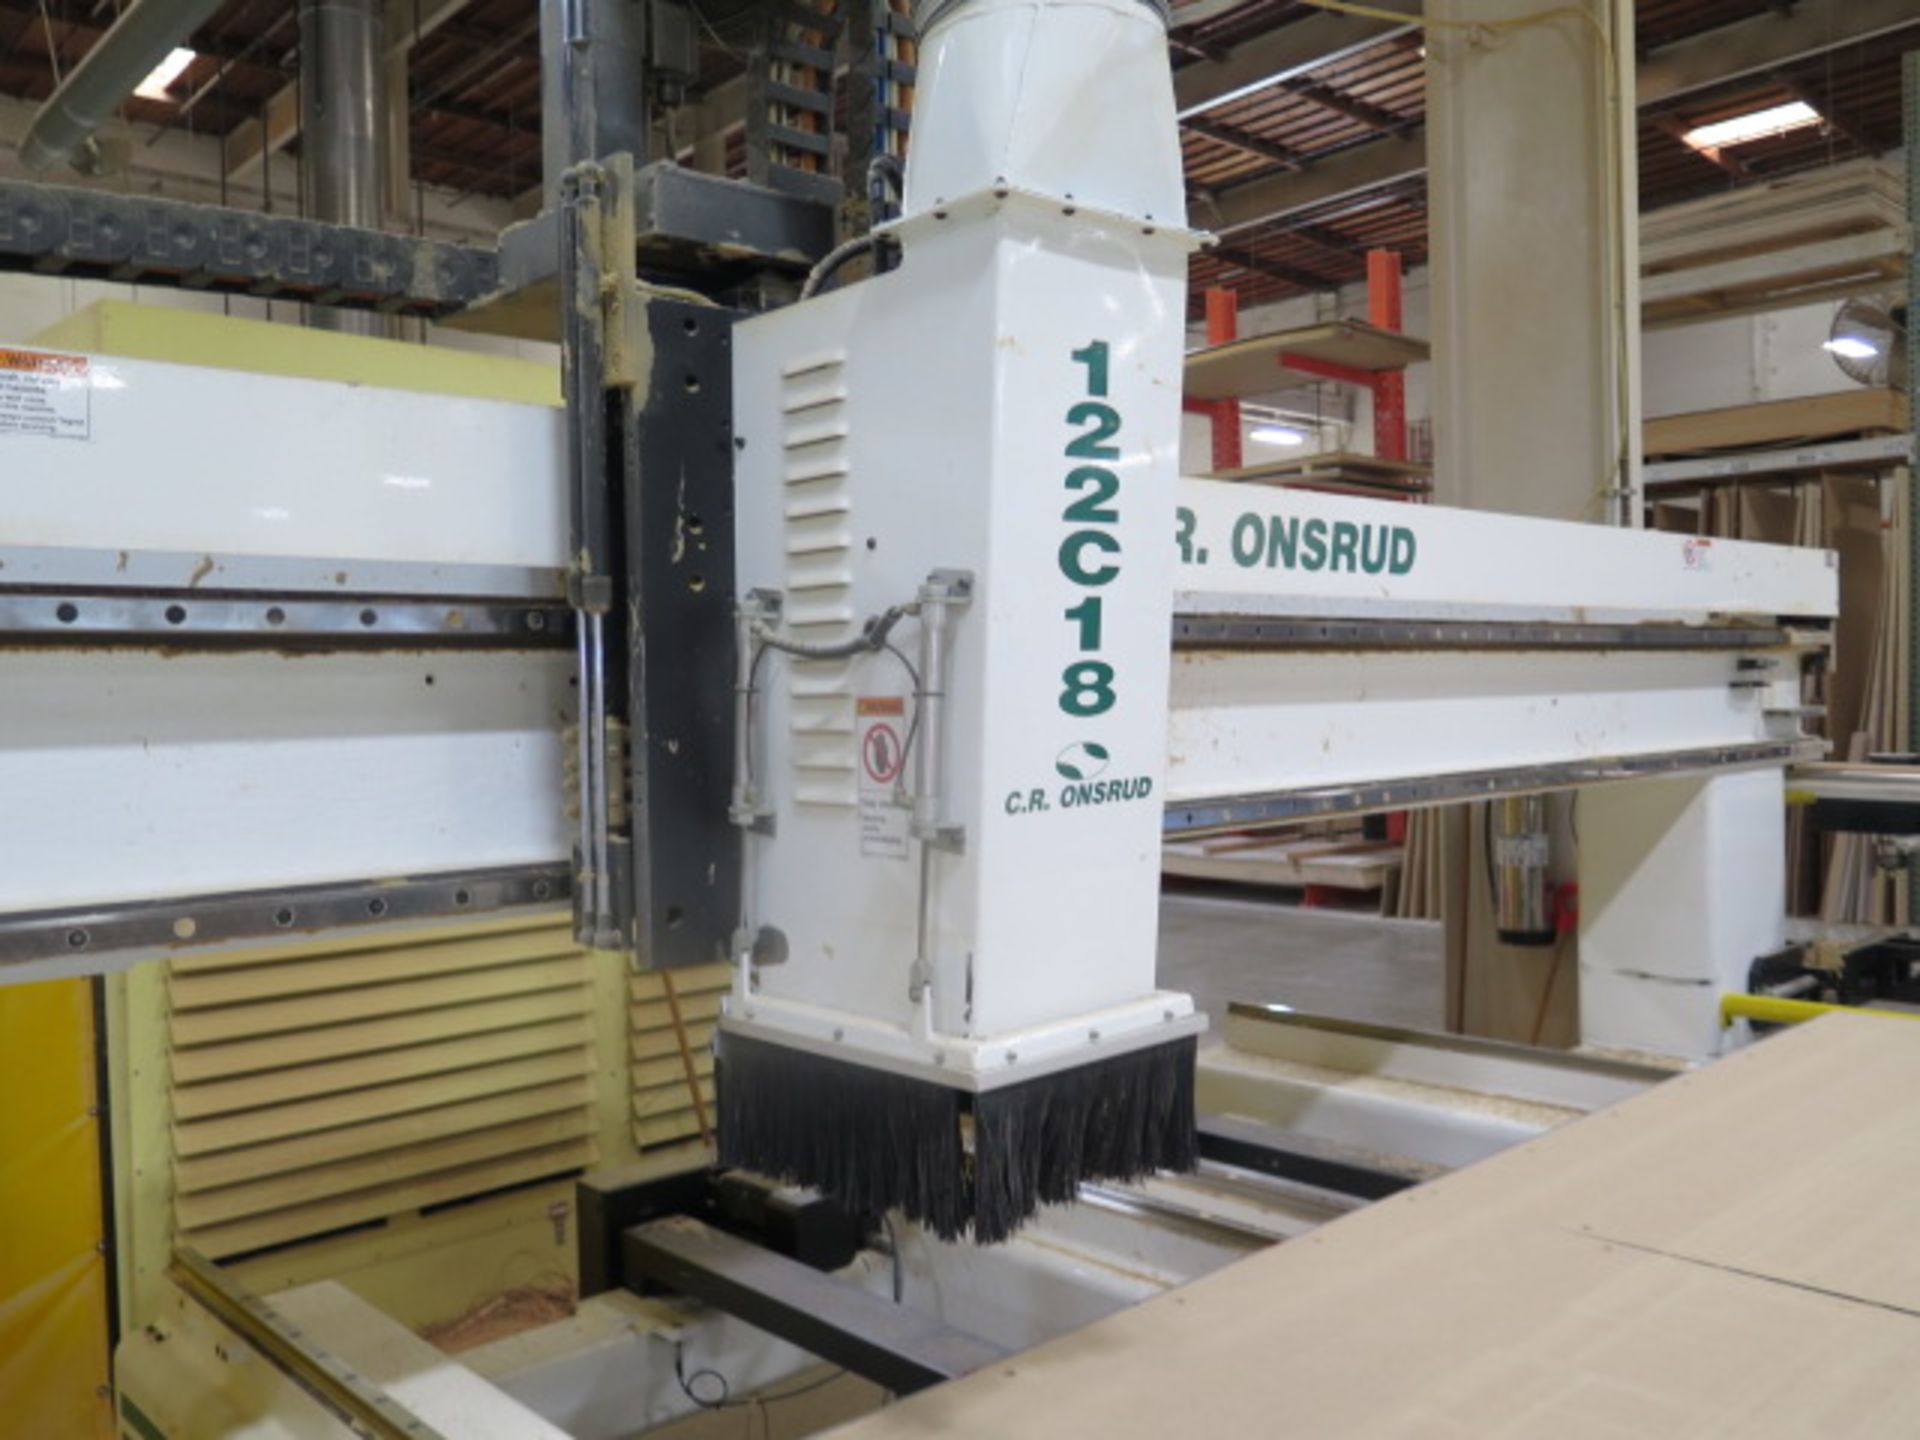 2008 C.R. Onsrud 122C18 CNC Router s/n 12280701 w/ WinMedia CNC Controls, SOLD AS IS - Image 5 of 18